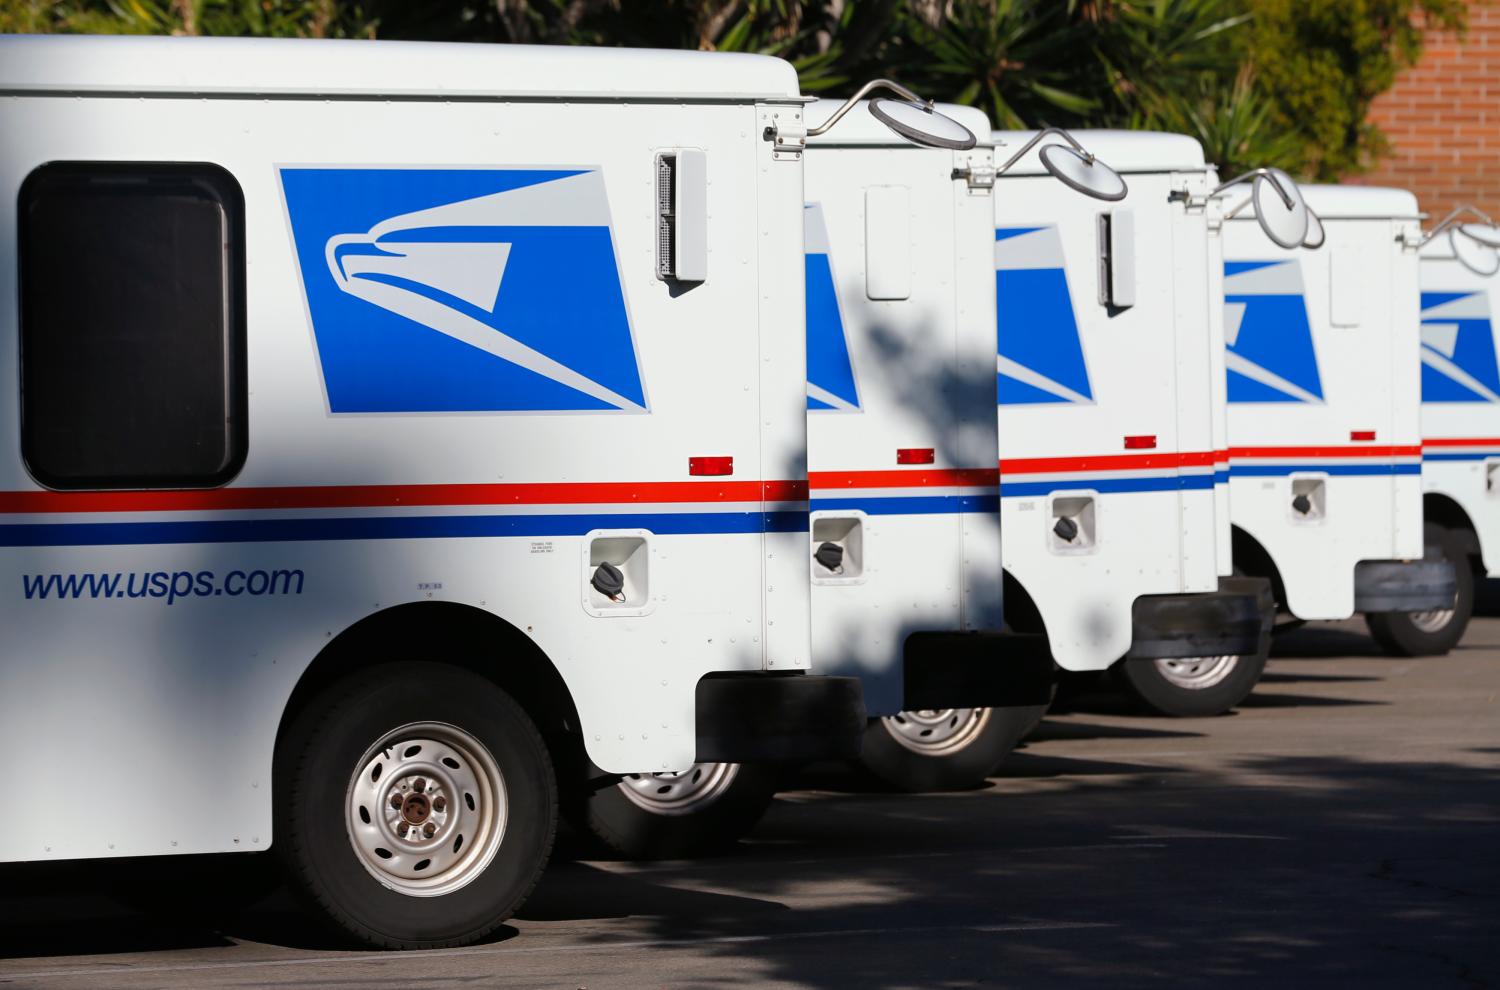 U.S. postal service trucks sit parked at the post office in Del Mar, California November 13, 2013. REUTERS/Mike Blake